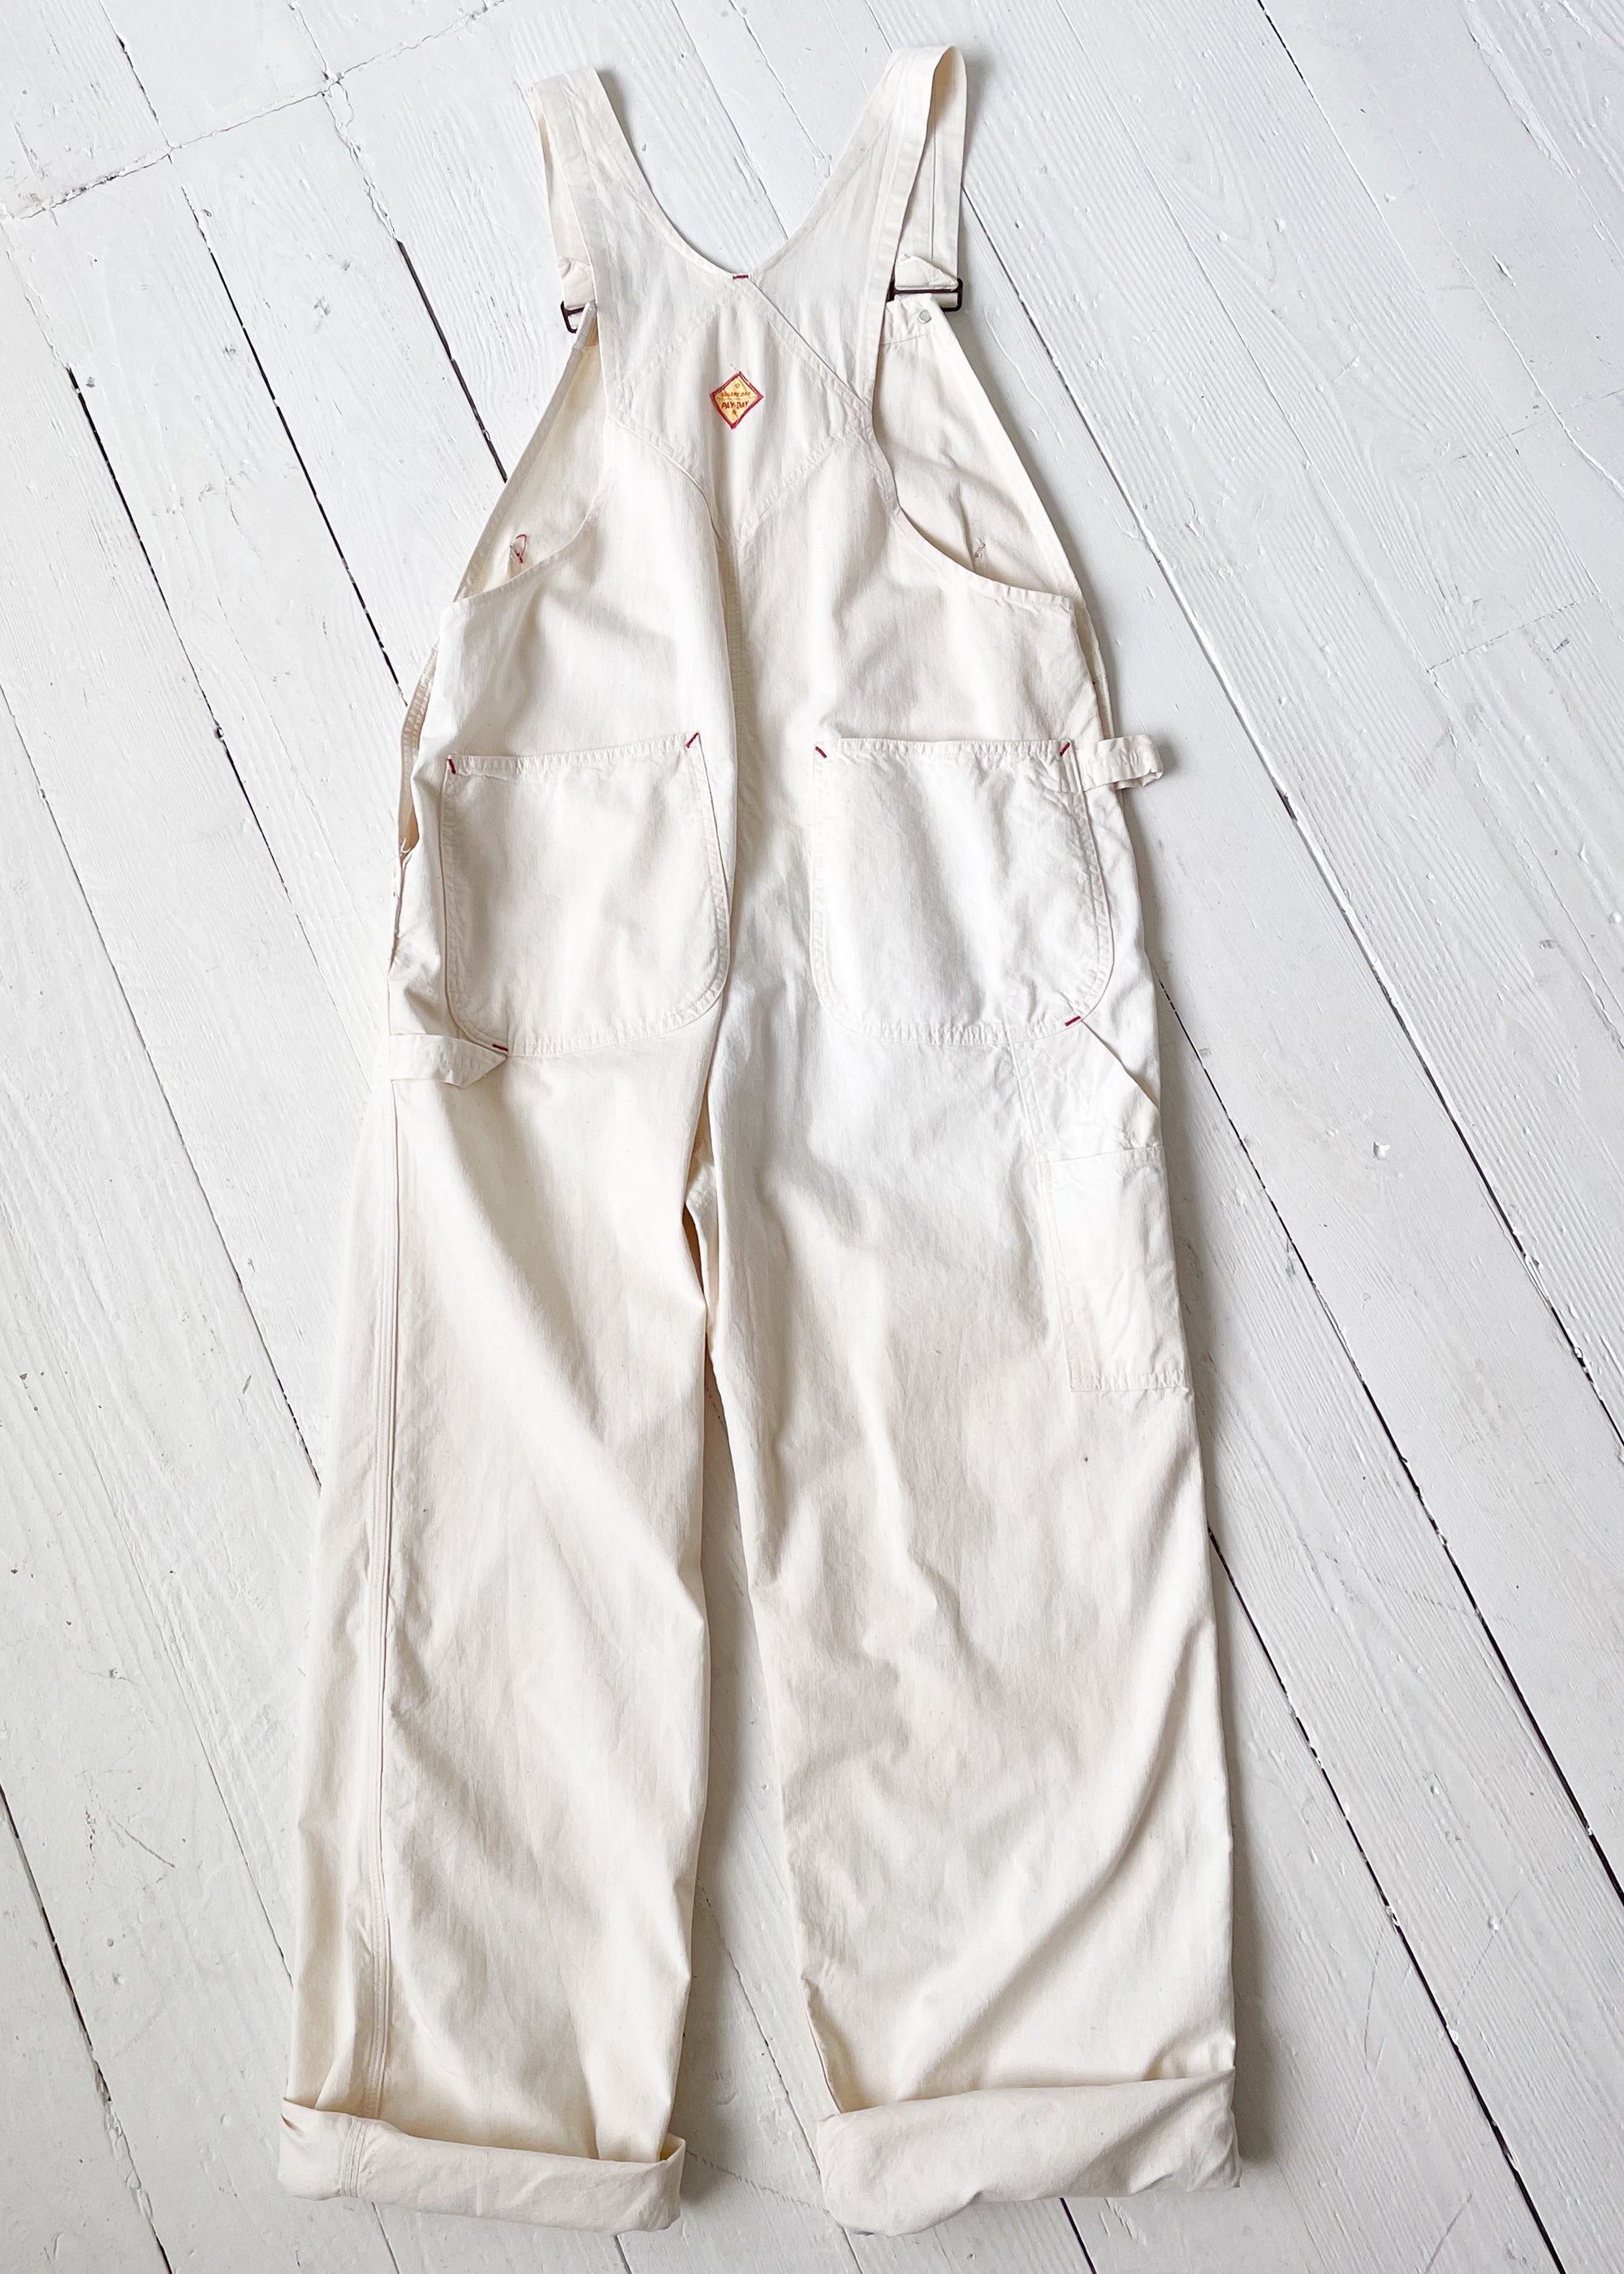 Vintage 1950s Pennys Pay Day White Overalls - Raleigh Vintage